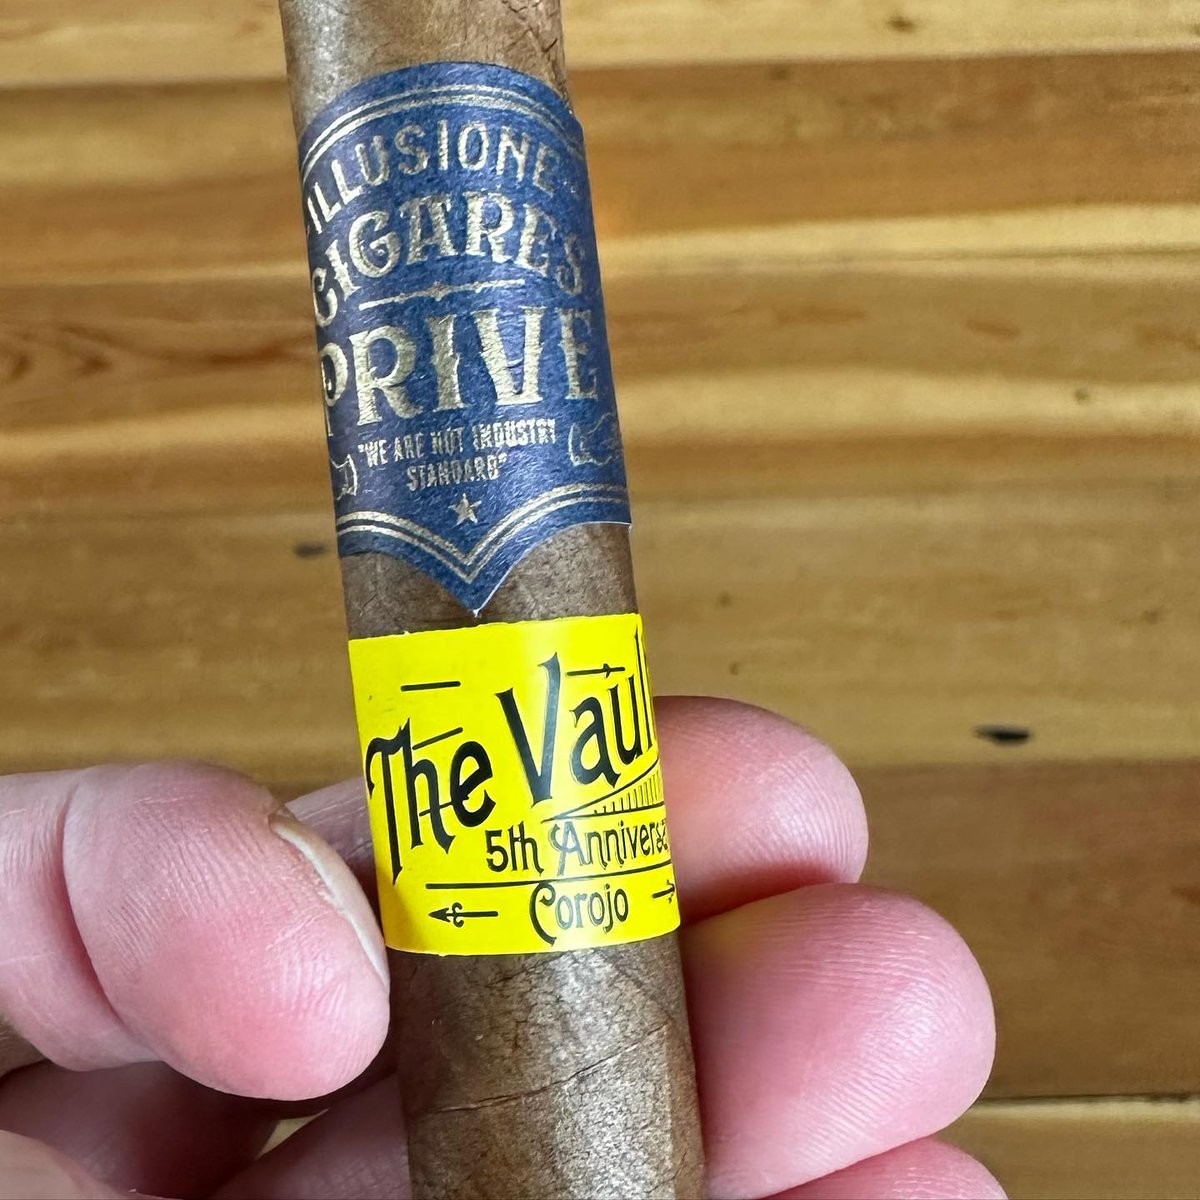 📷 by @vaultcigarlounge: Let the testing begin. Thanks @illusione_cigars for the hard work! I know our customers will appreciate it! #thosewhoknowknow